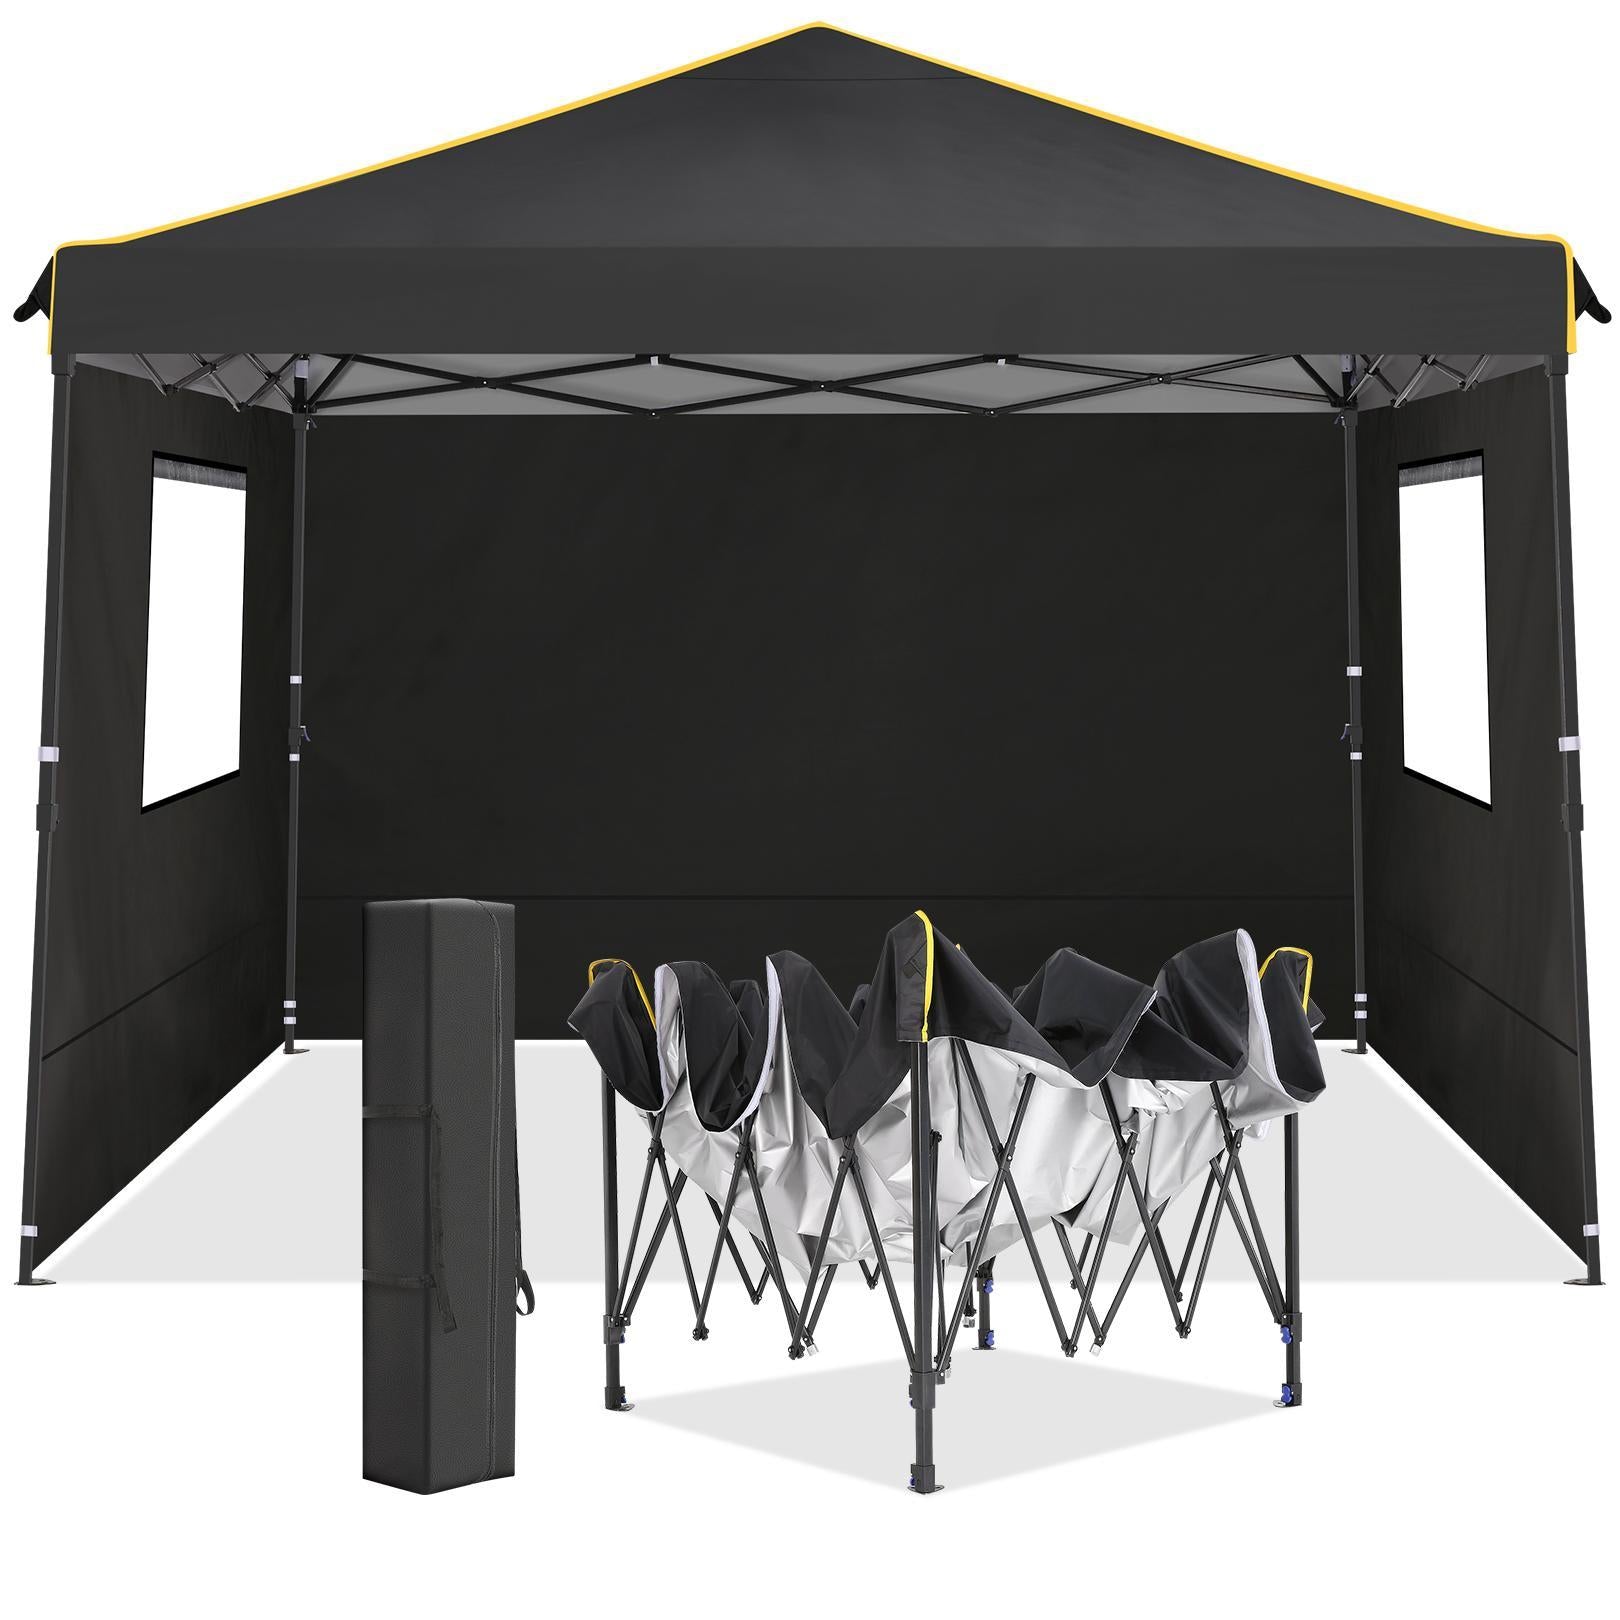 Likein 10x10 Pop Up Canopy Tent with 4 Removable Sidewalls, Waterproof Commercial Instant Gazebo Tent Outdoor Canopy Tents for Party/Exhibition/Picnic with Carry Bag, 4 Stakes and Ropes (Black)